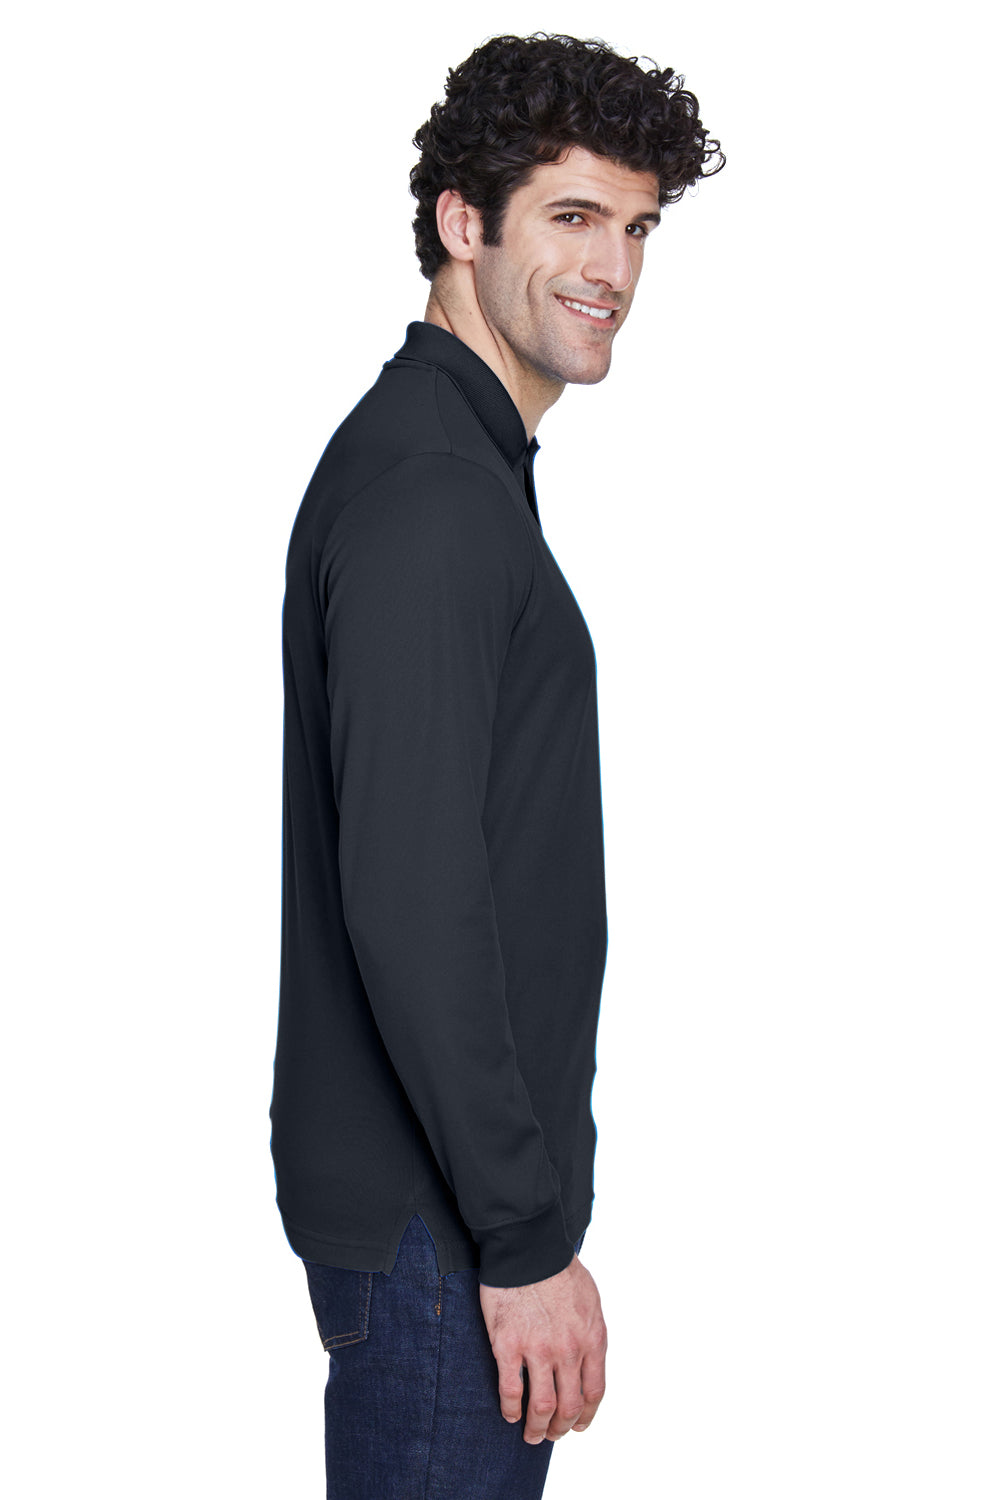 Core 365 88192 Mens Pinnacle Performance Moisture Wicking Long Sleeve Polo Shirt Carbon Grey Side